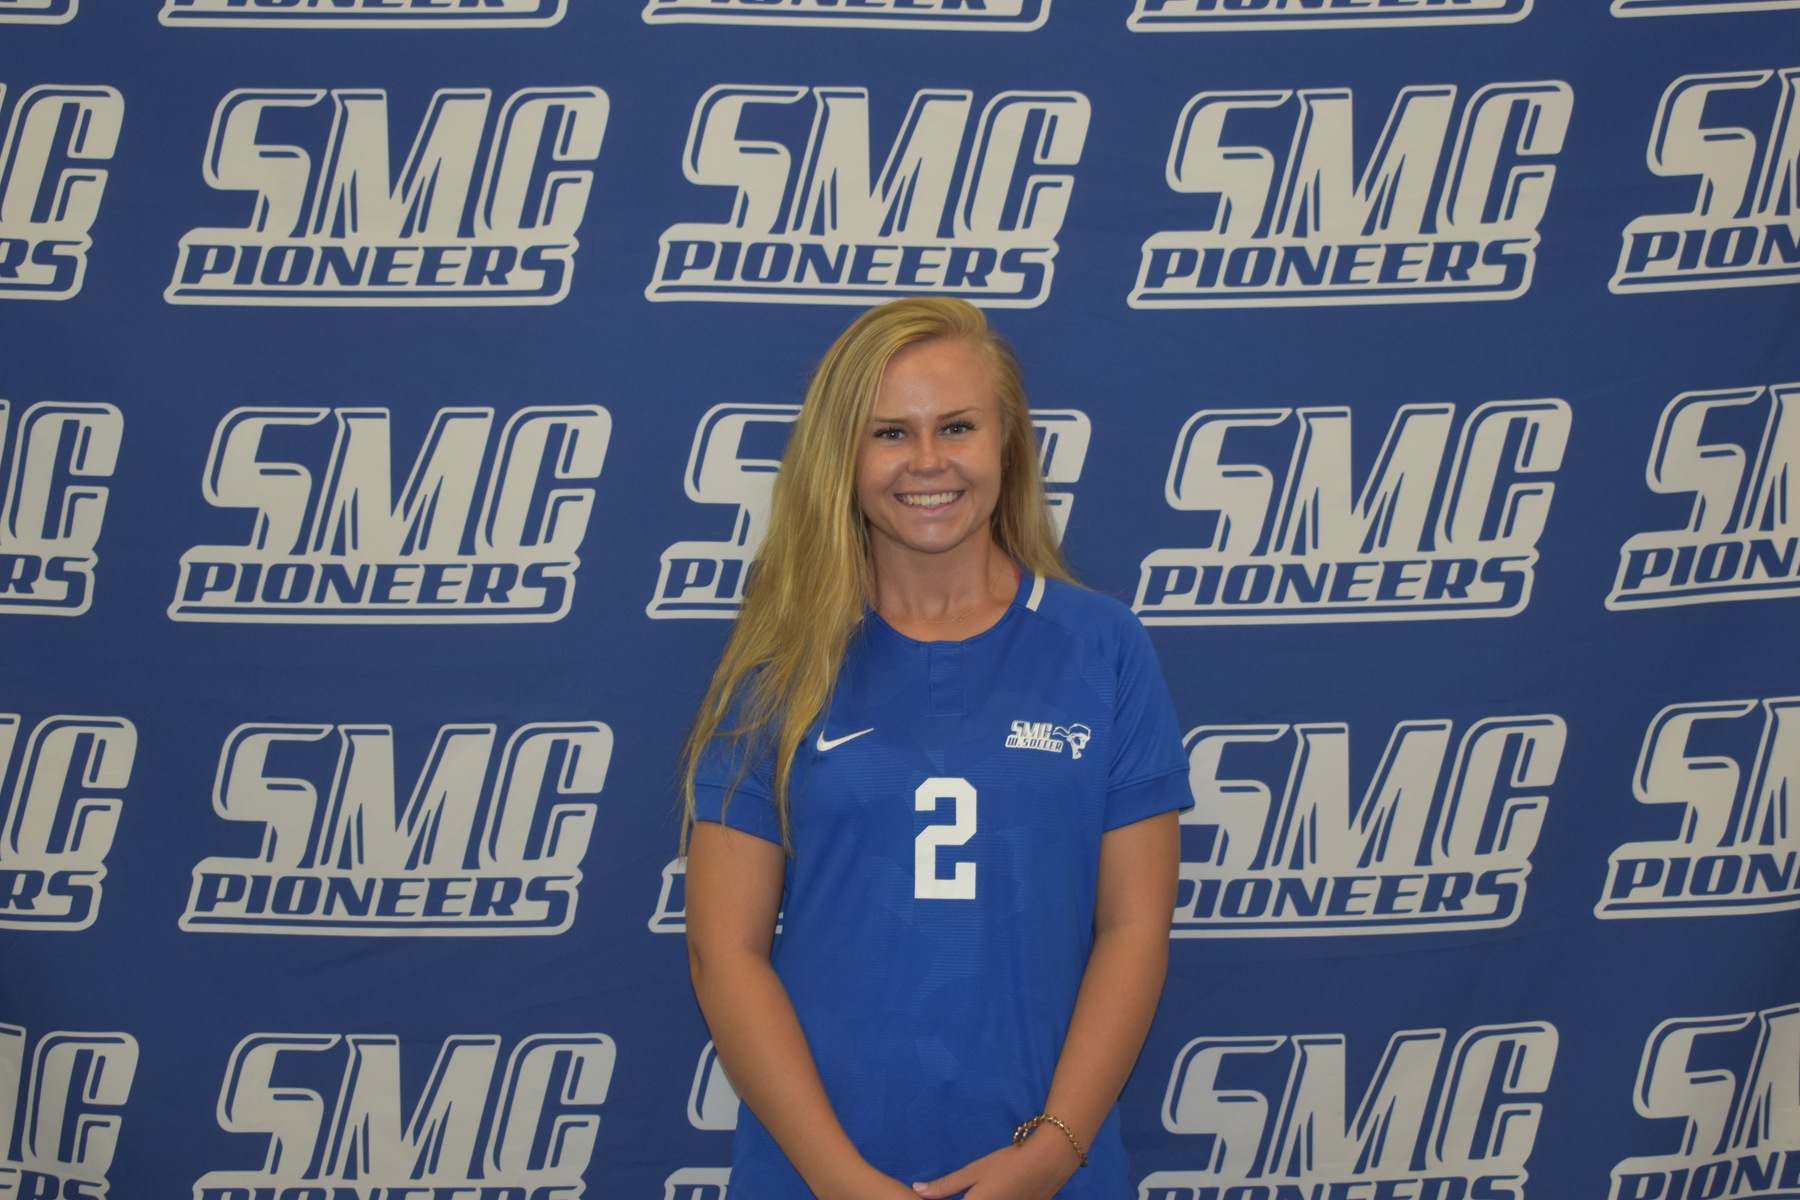 A Day in the Life of an SMC Women's Soccer- Abigail Gibson